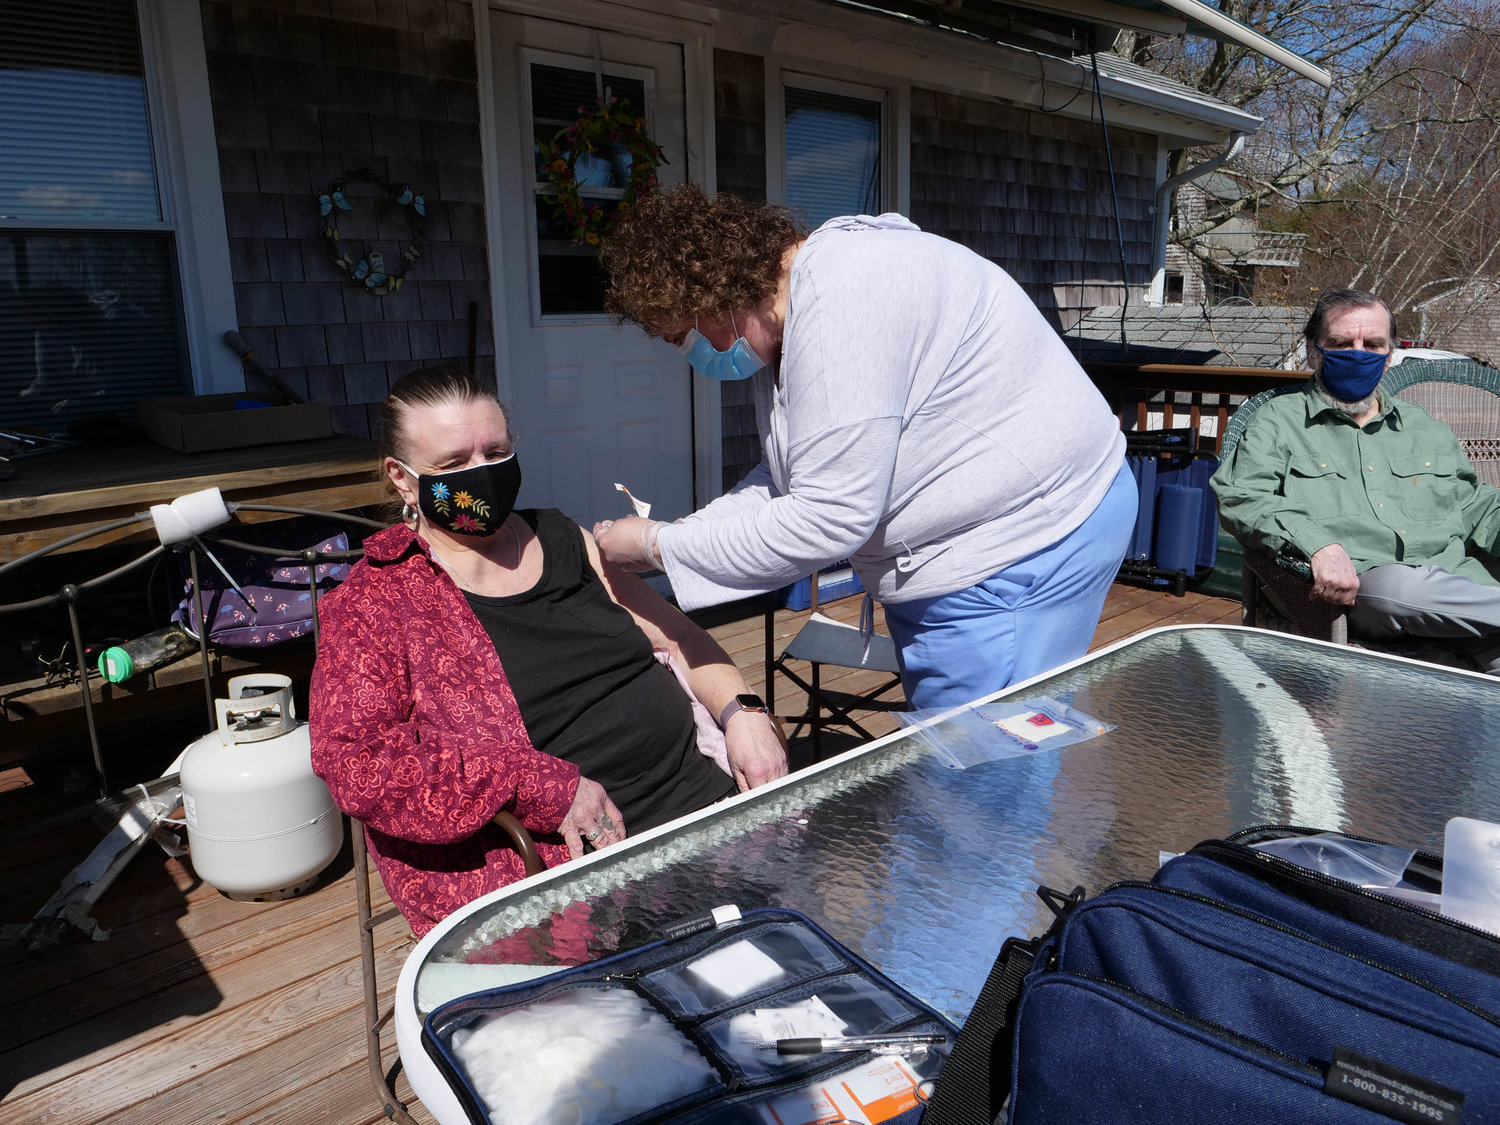 Prudence Island resident Linda Walsh receives a COVID-19 vaccination from registered nurse Lisa Pagliaro of PACE-RI, while her husband, Rick, waits his turn. Ms. Pagliaro made the trip to the island Thursday to administer the vaccine to the island’s homebound residents.